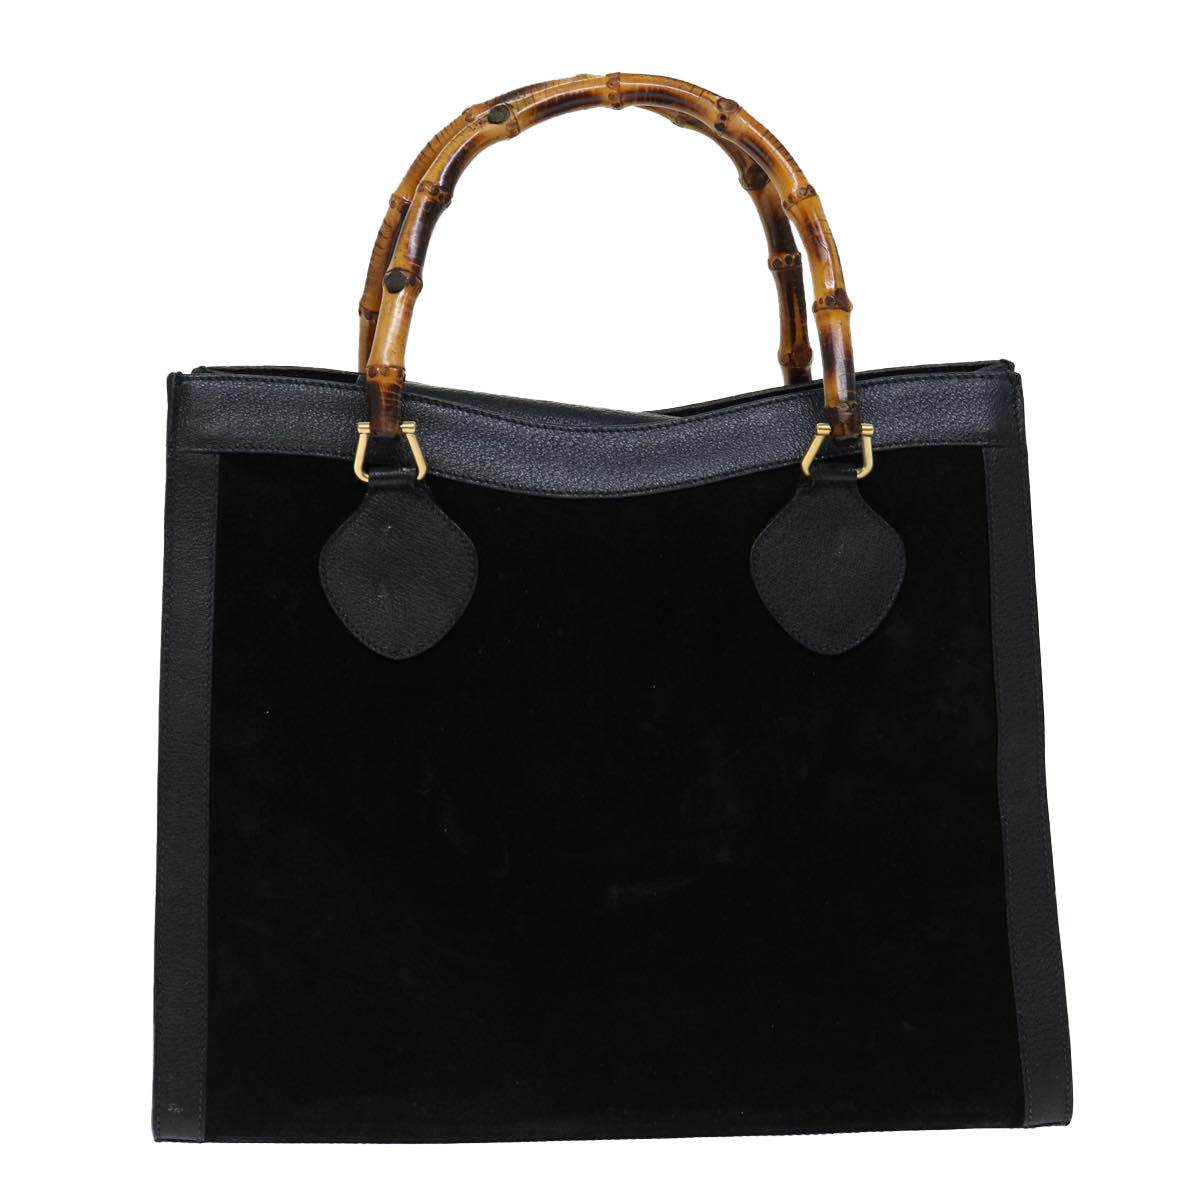 GUCCI Bamboo Tote Bag Suede Black 002 1186 0260 Auth 66947 - 0